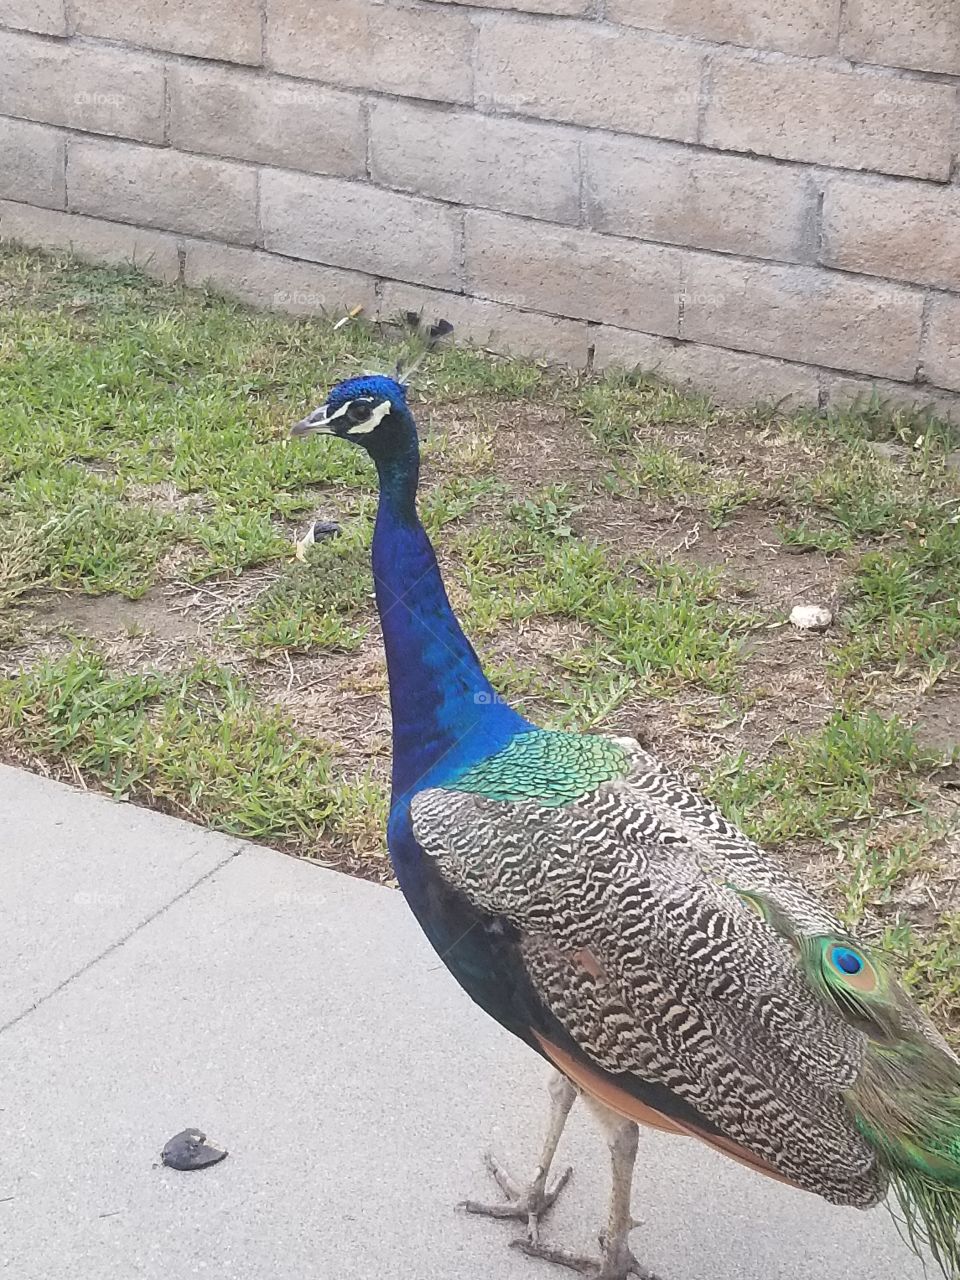 Peacock wandering the streets